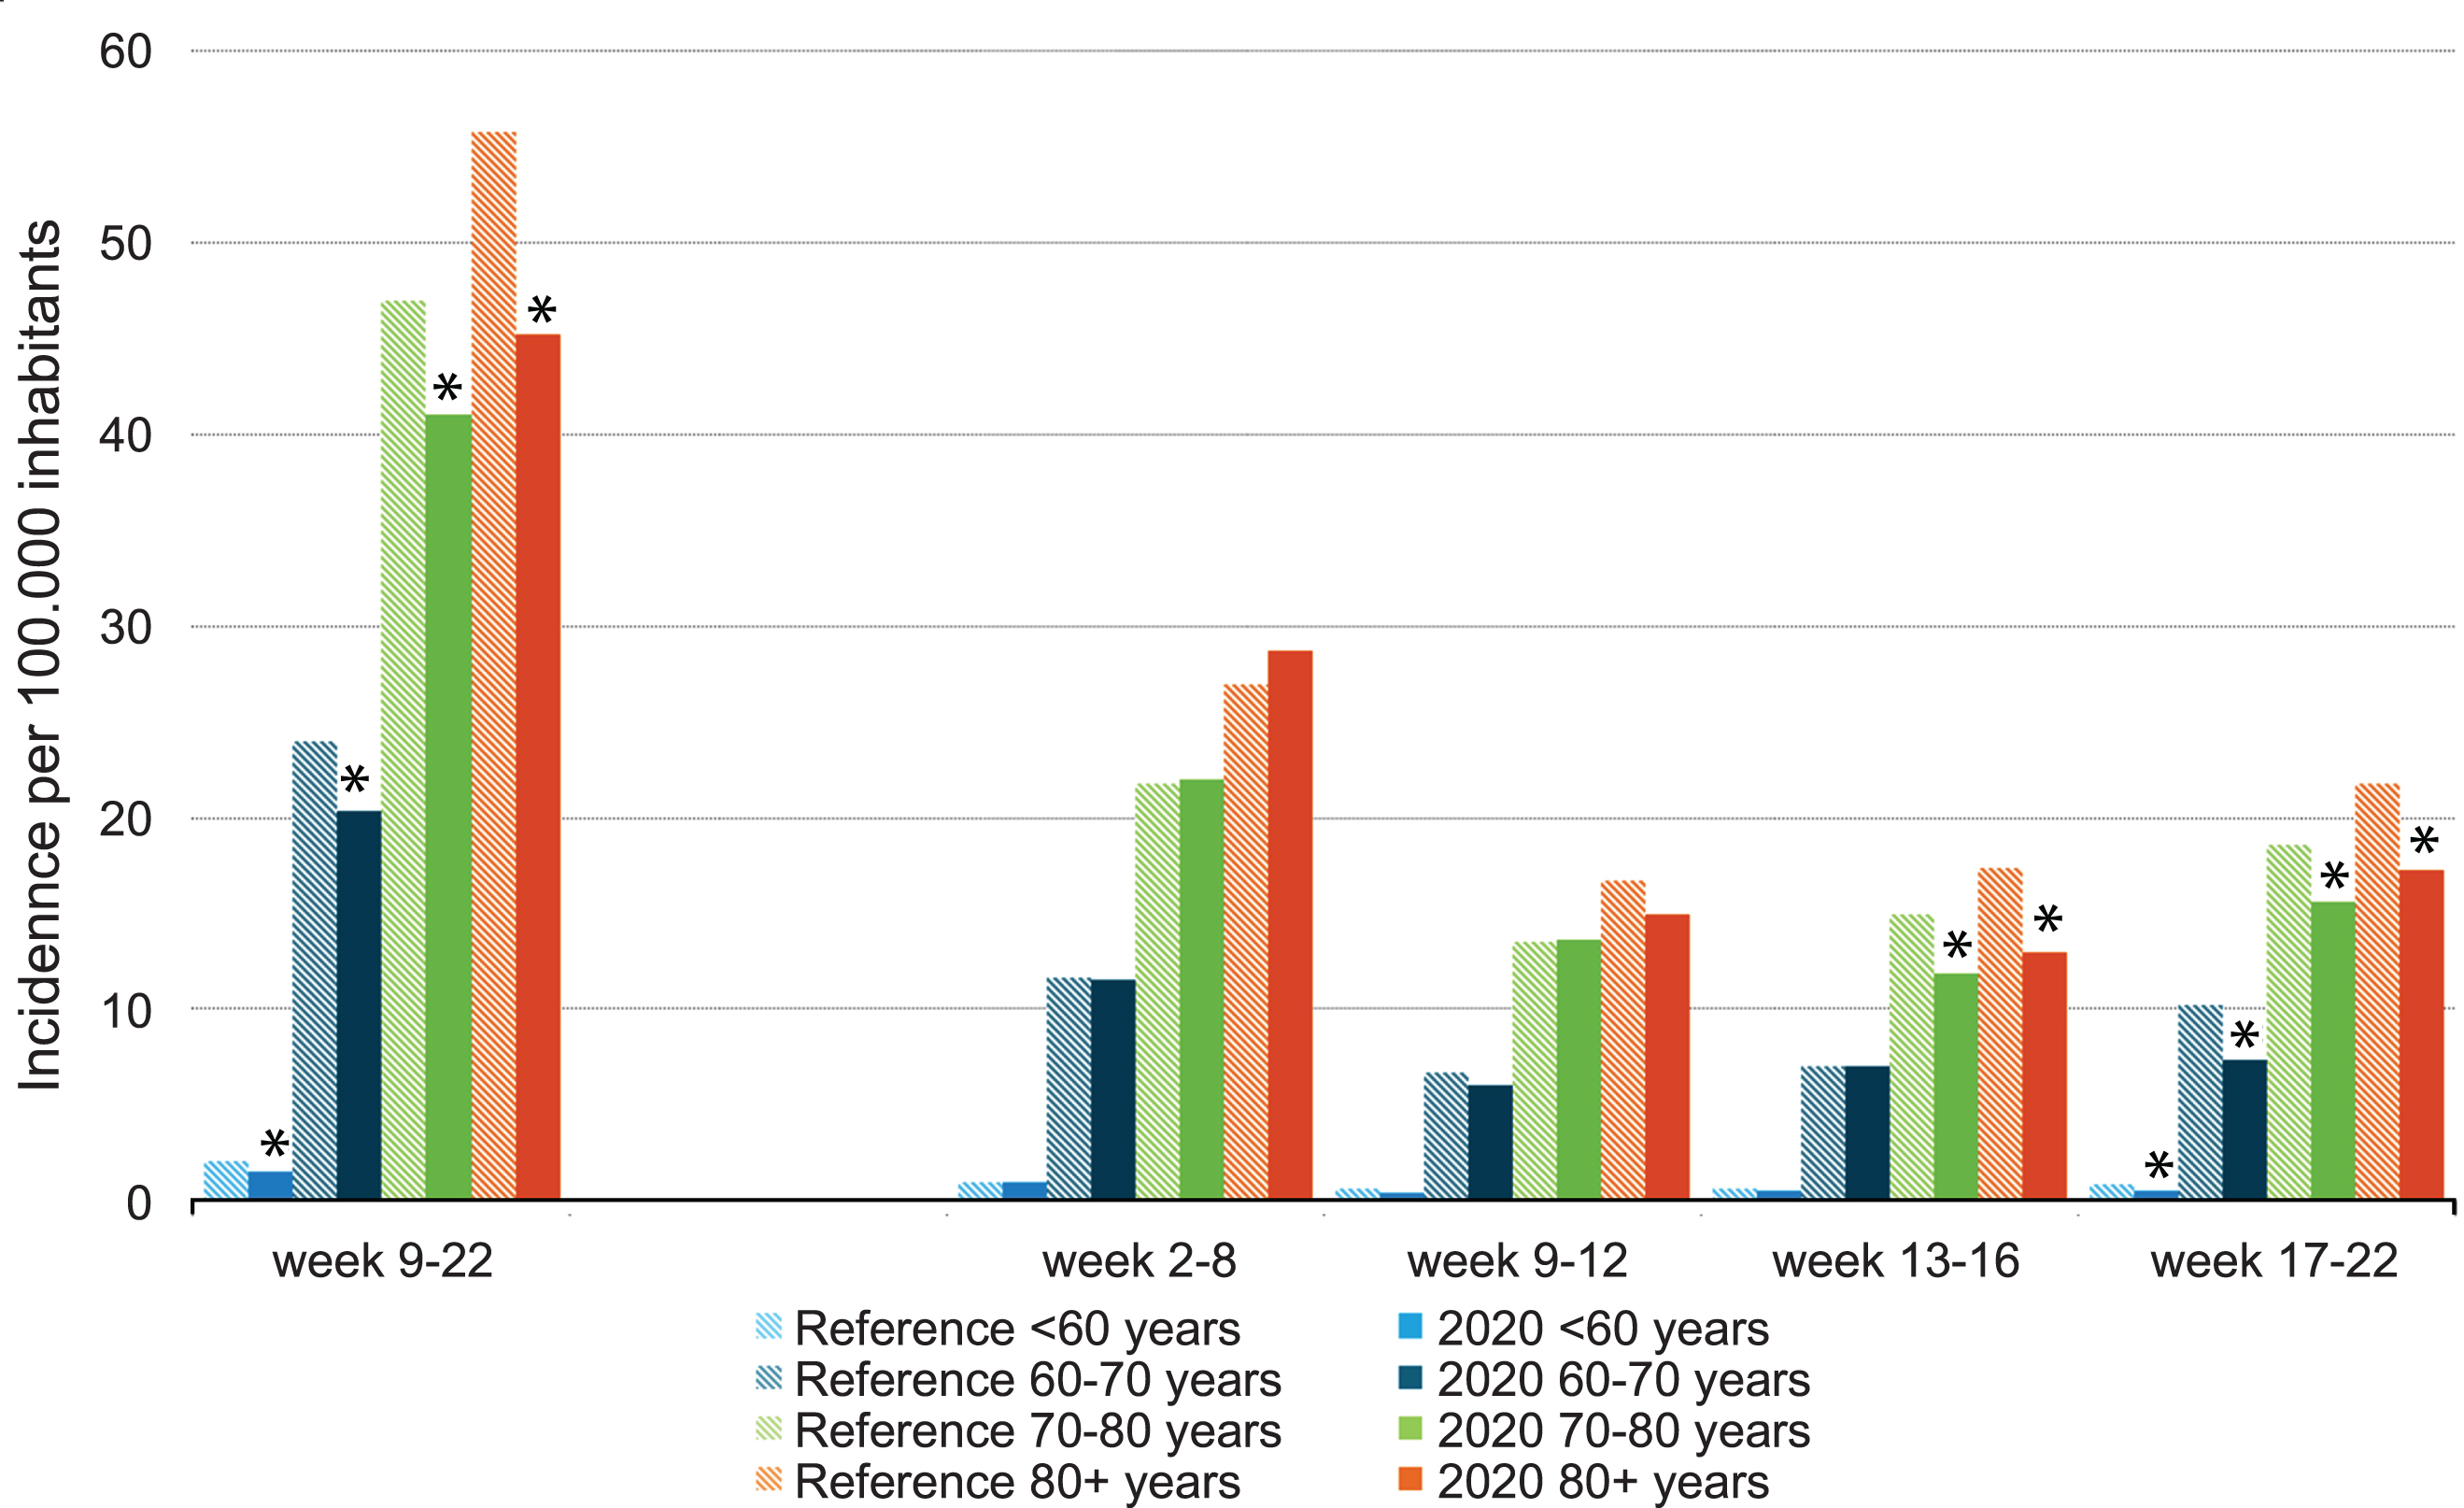 Incidence of bladder cancer per 100,000 inhabitants per period of diagnosis, stratified by age at diagnosis. *In 2020, the incidence is significantly lower compared to the average incidence in 2018/2019 (p < 0.05).